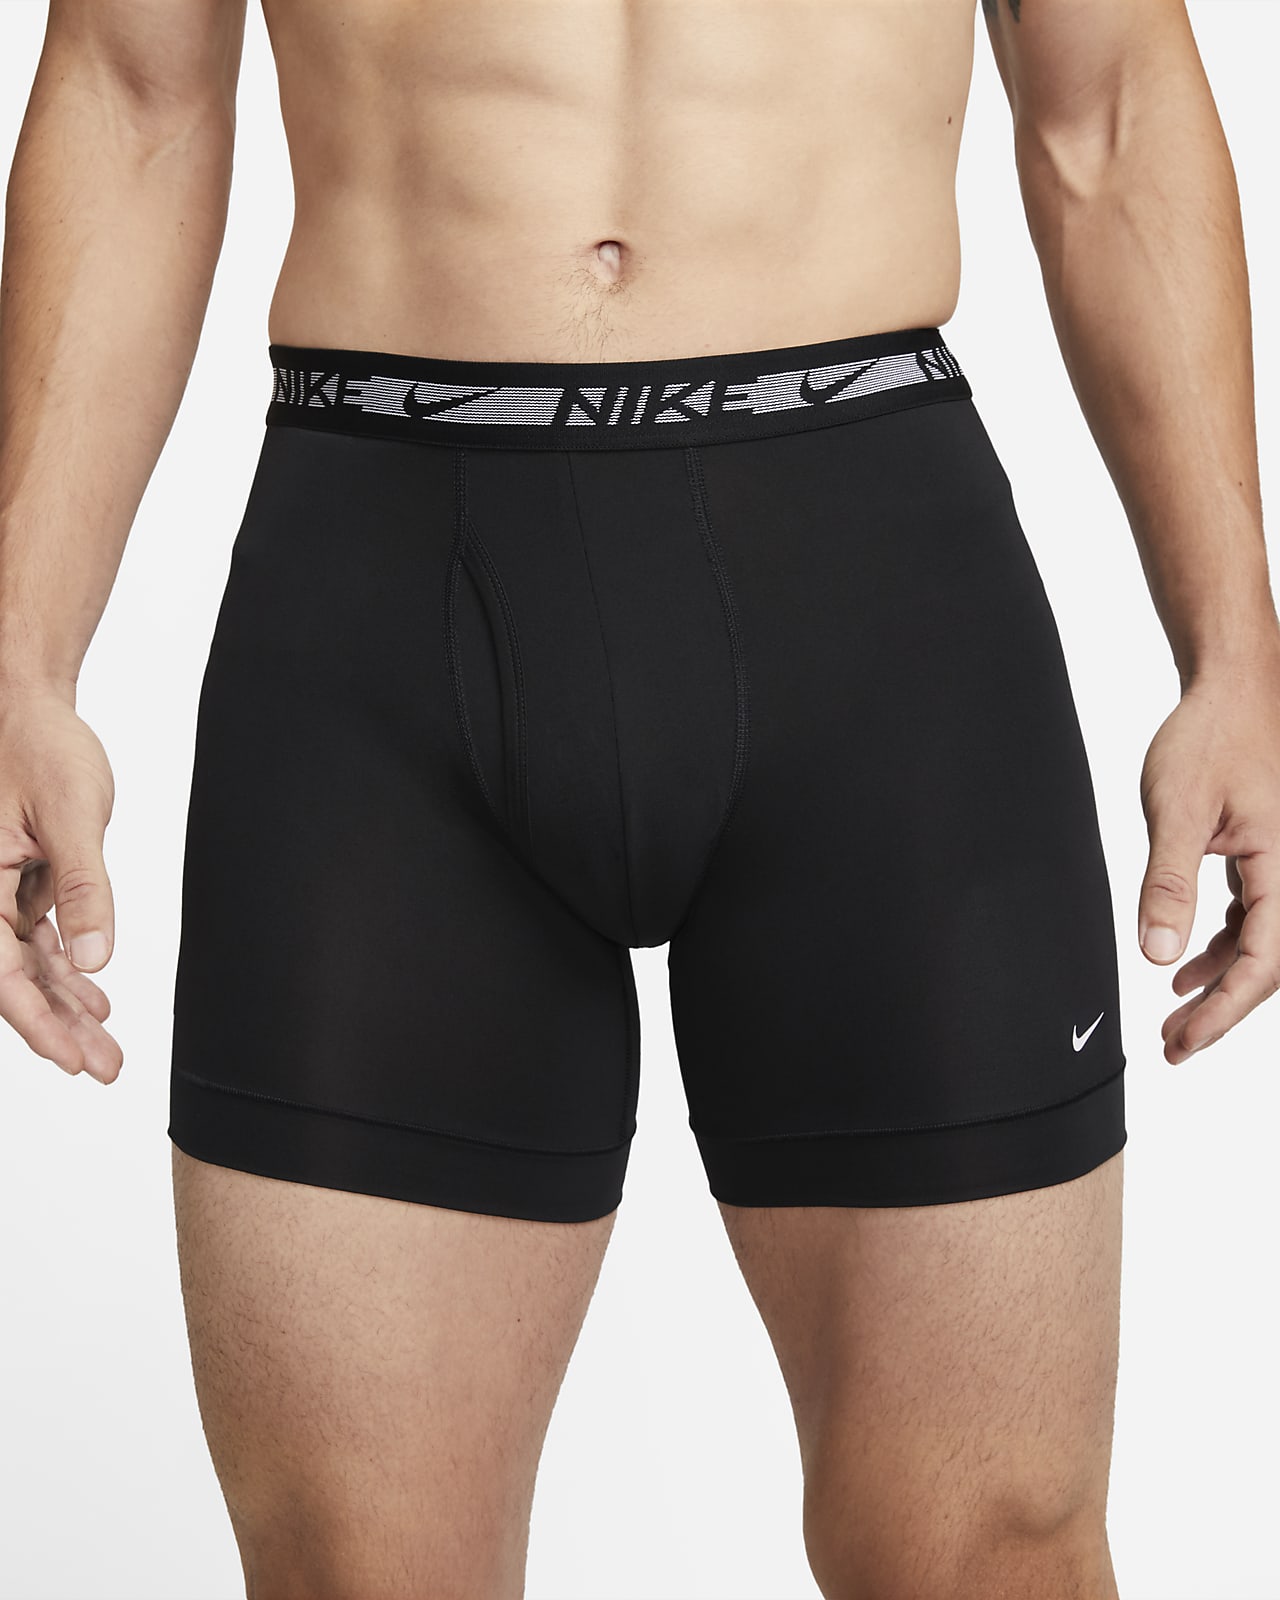 Boxer shorts Nike Ultra Stretch Micro Dri-FIT Boxer 3-Pack Crackle